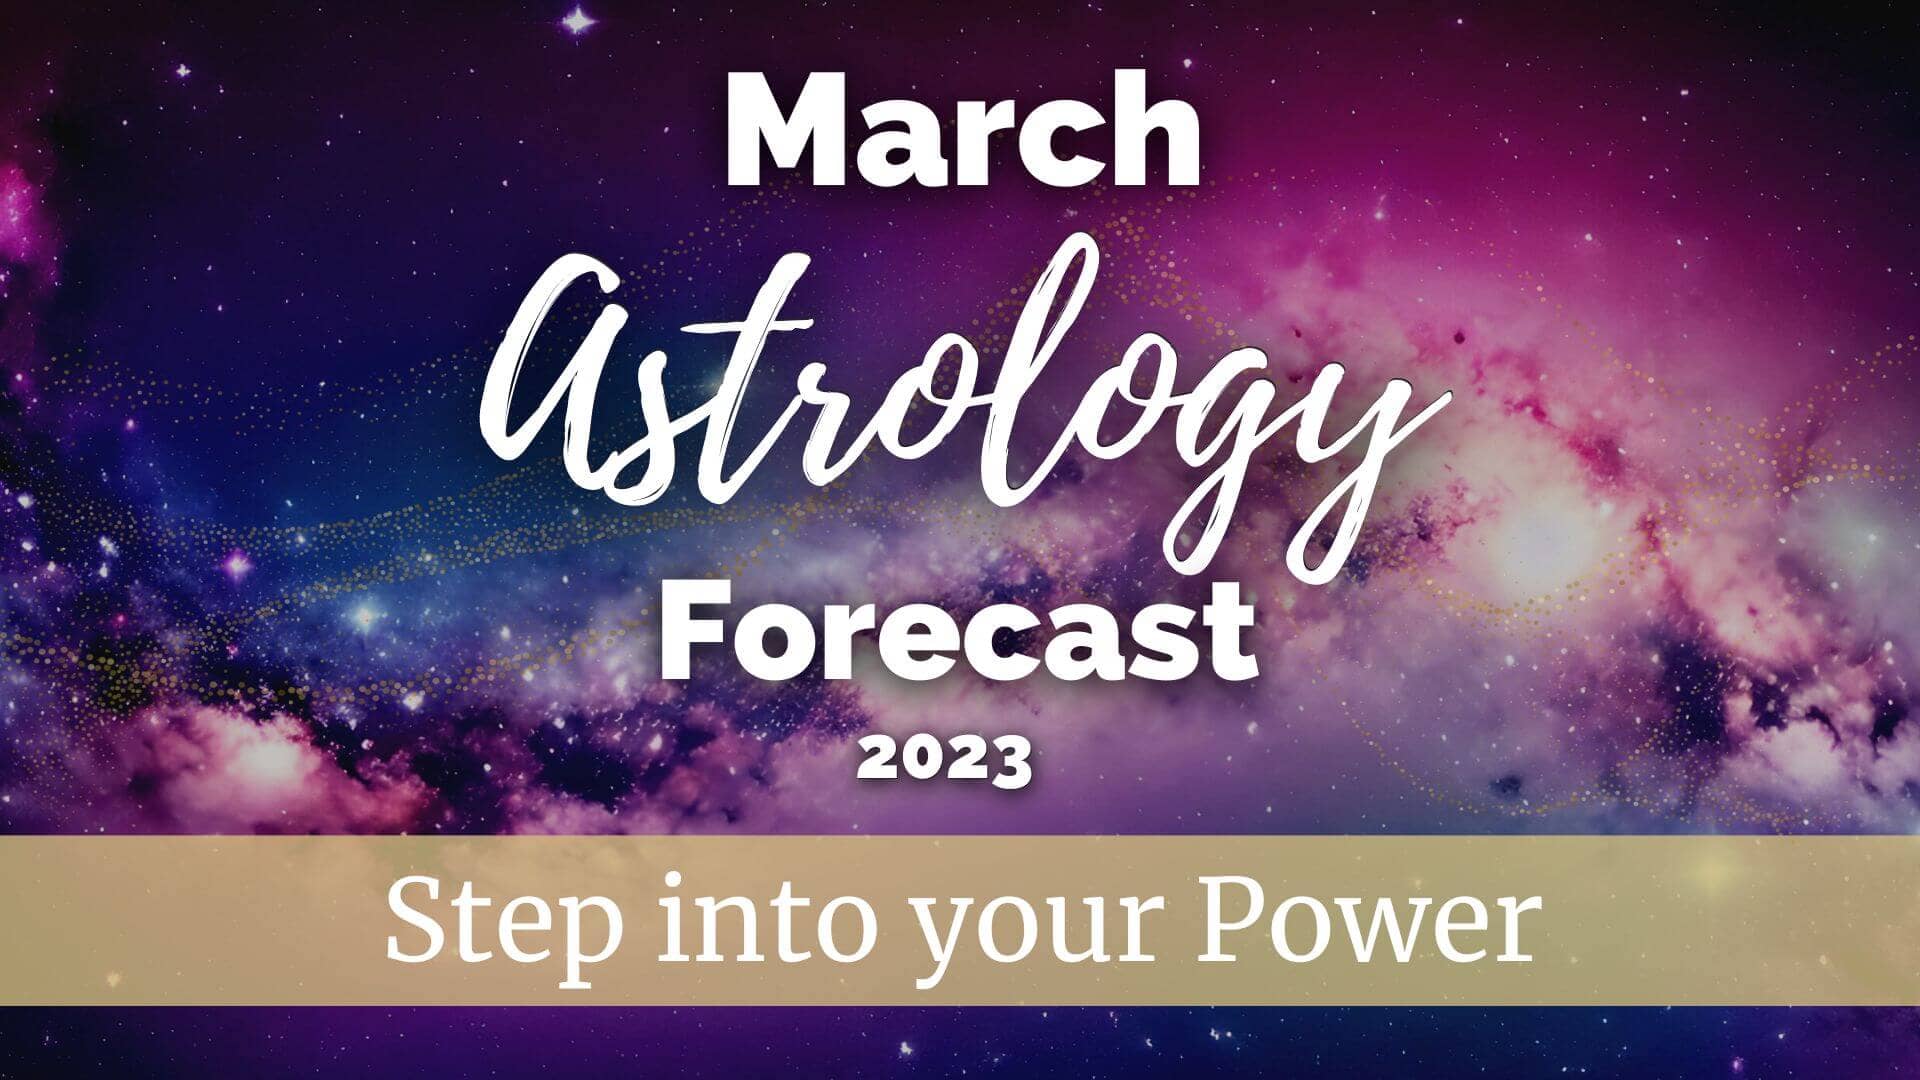 March 2023 Forecast